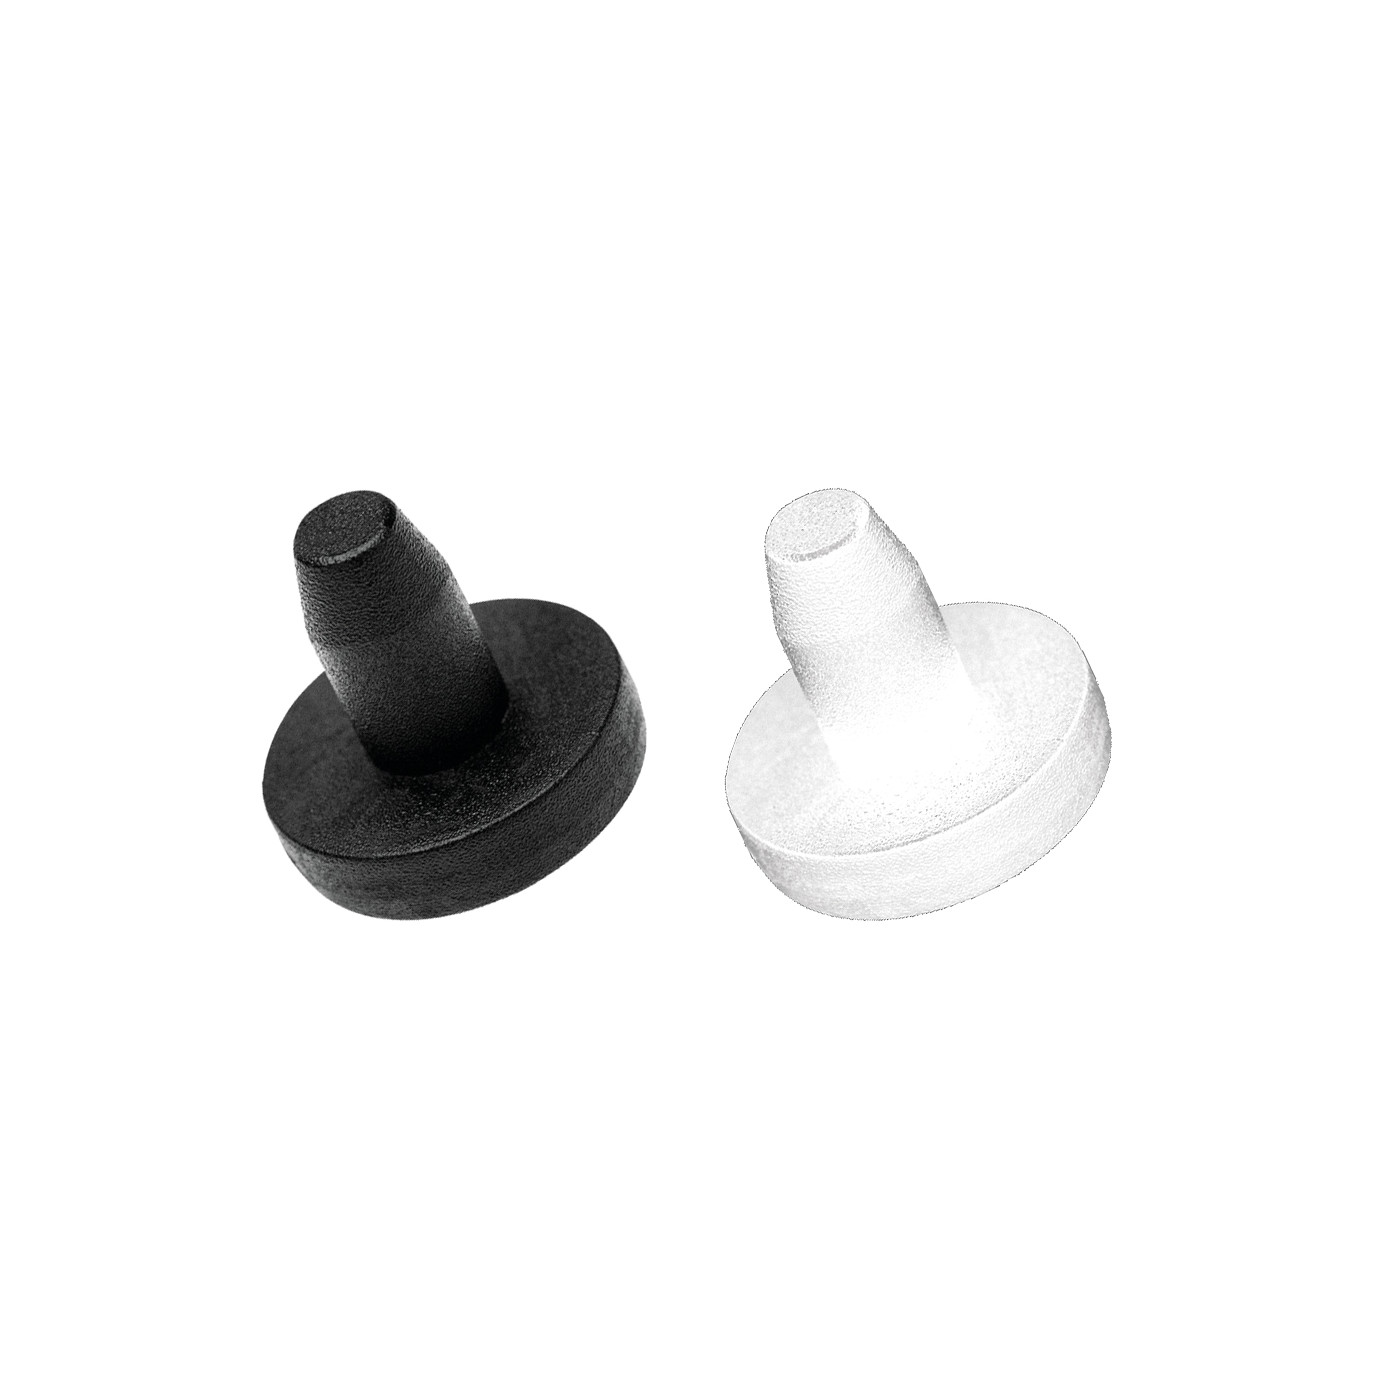 Set of 30 PVC plugs, buffers, bumpers (inside, round, 6.5 mm